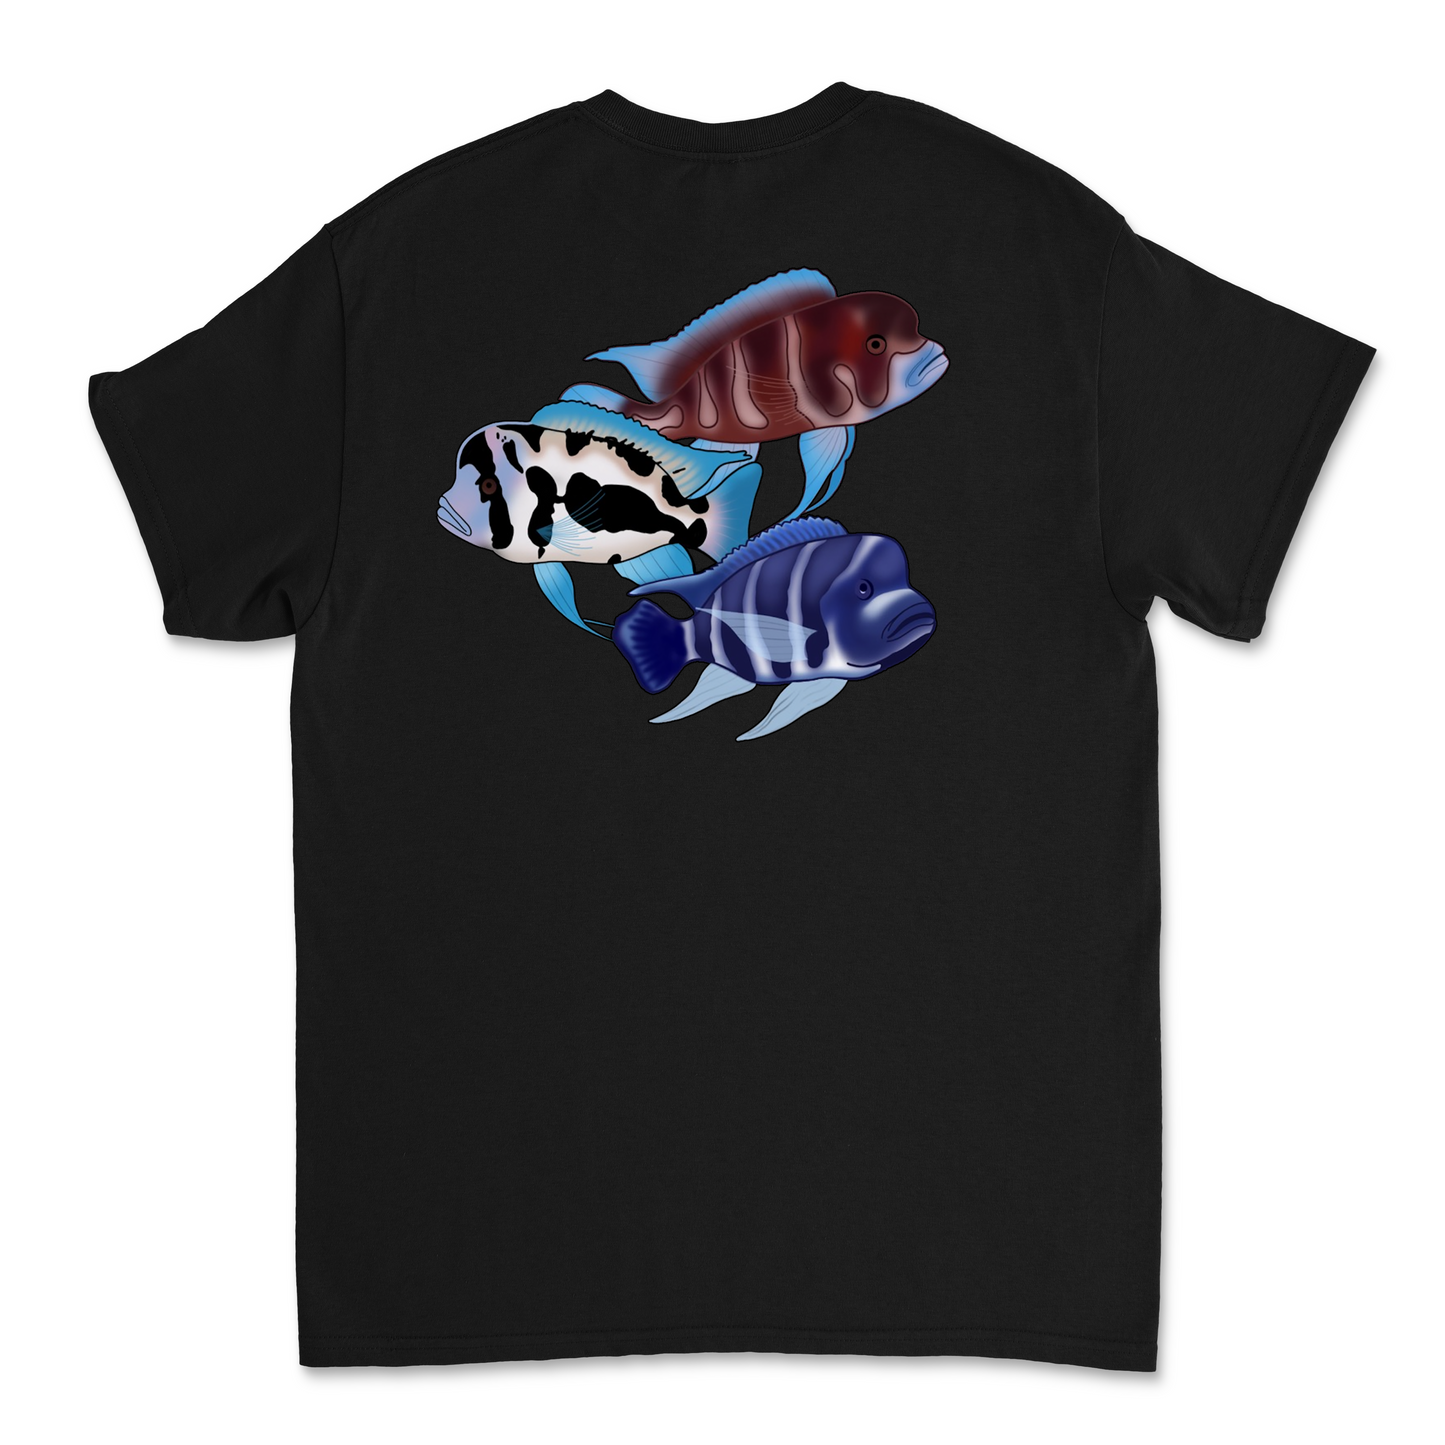 The Tank Life Apparel frontosa cichlid design on a classic tee with our custom TLA sleeve label. Three fish Black widow, red frontosa, blue zaire. Blue fish with dark stripes.